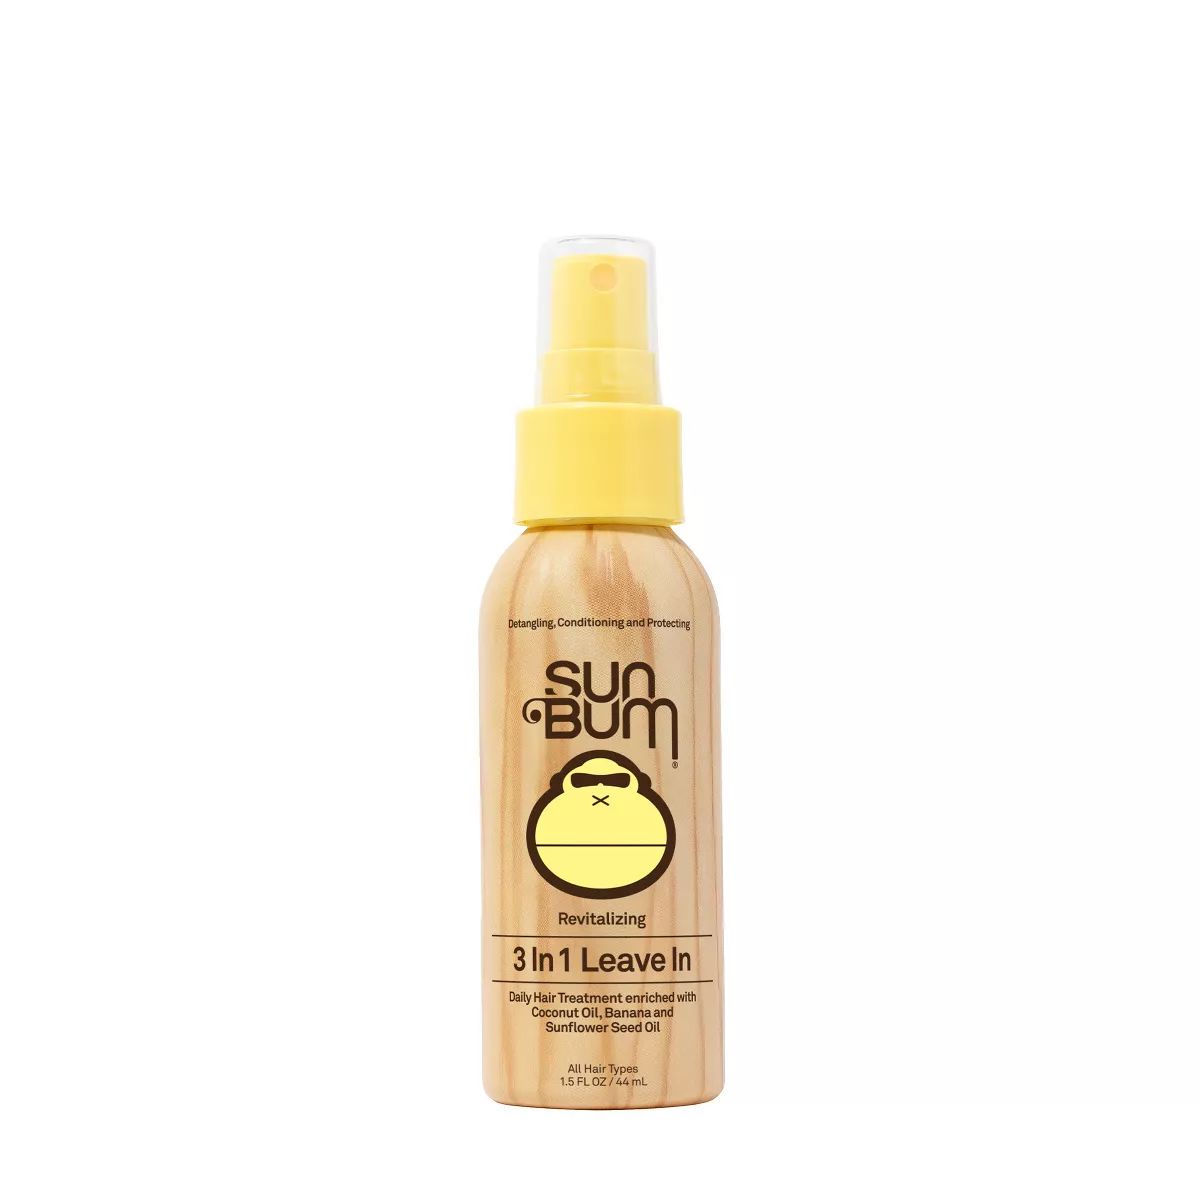 Sun Bum 3-in-1 Leave-In Hair Conditioner Treatment | Target